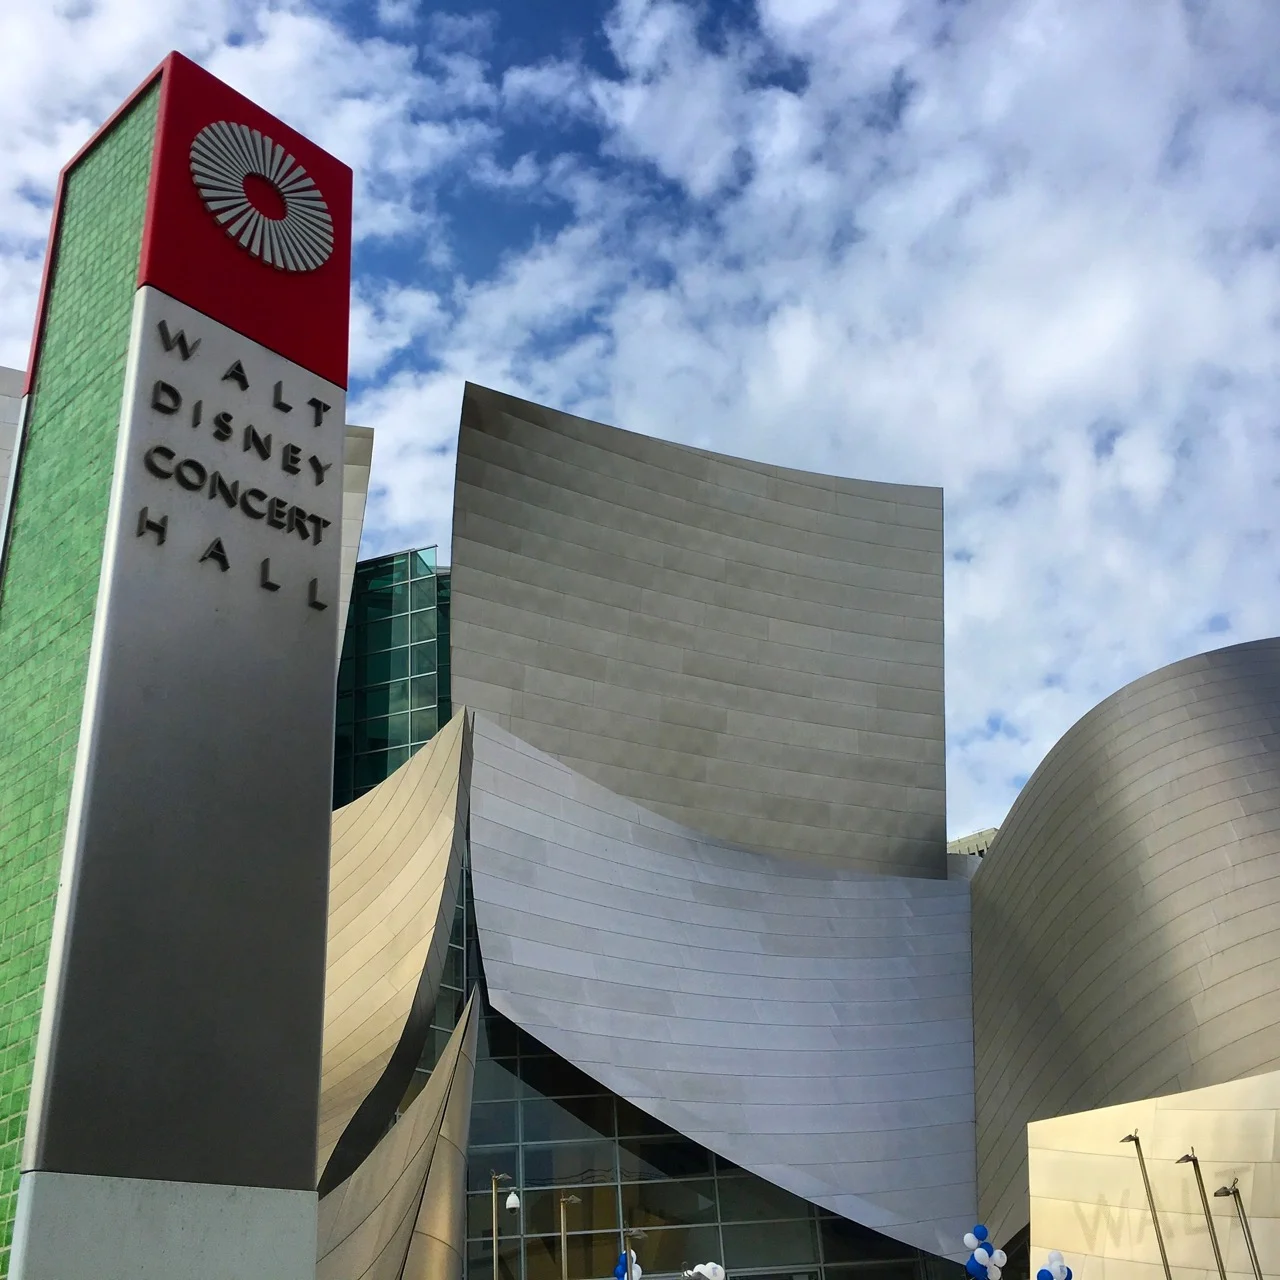 Walt Disney Concert Hall is just one of the things to do in Los Angeles with kids